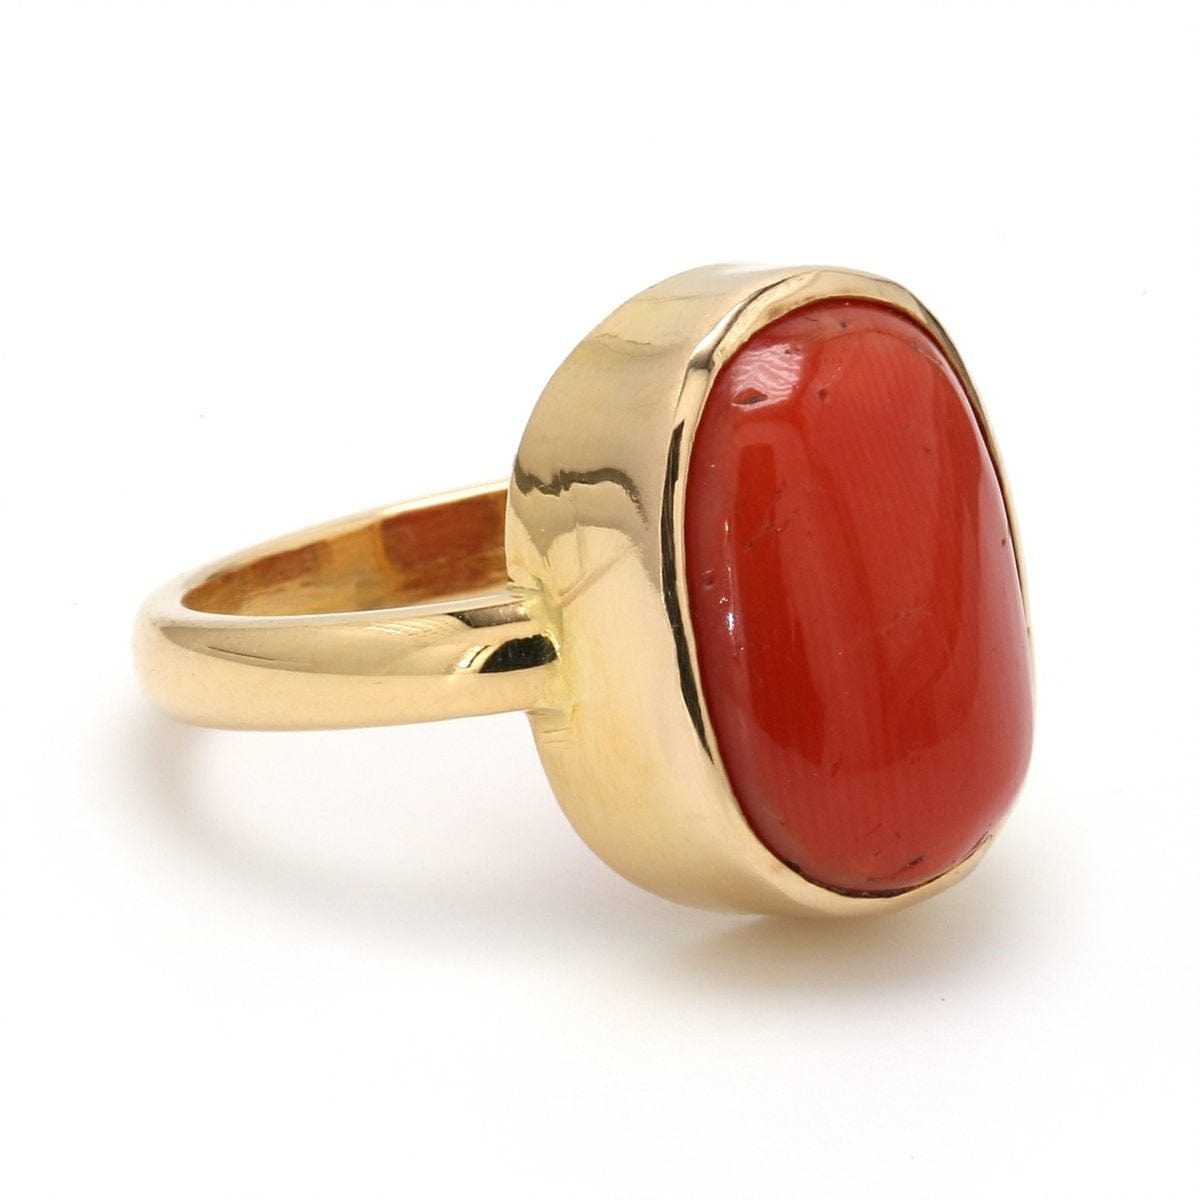 Circa 1940s Art Deco Style Rectangular Coral Ring in 14K Gold – The Verma  Group